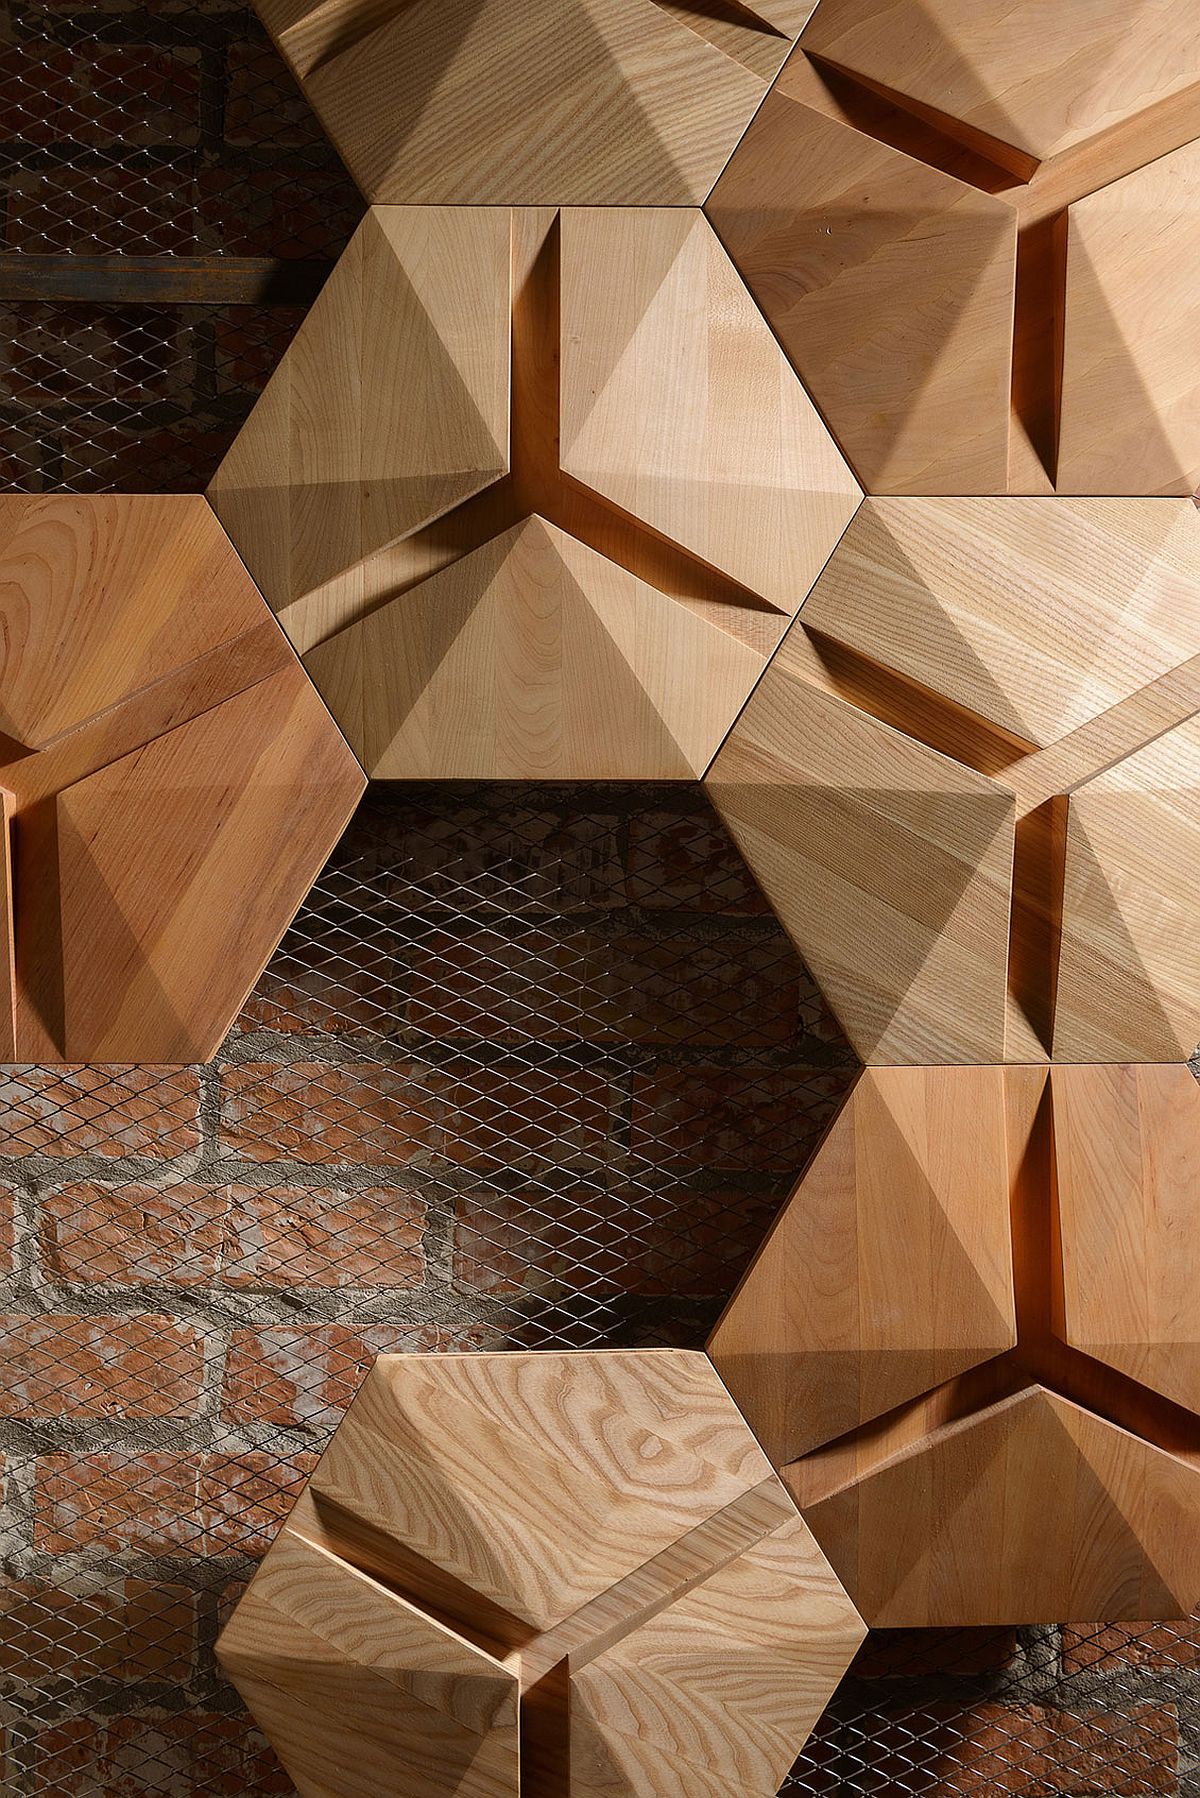 Pyramid and triangle shaped wooden surfaces add geo style